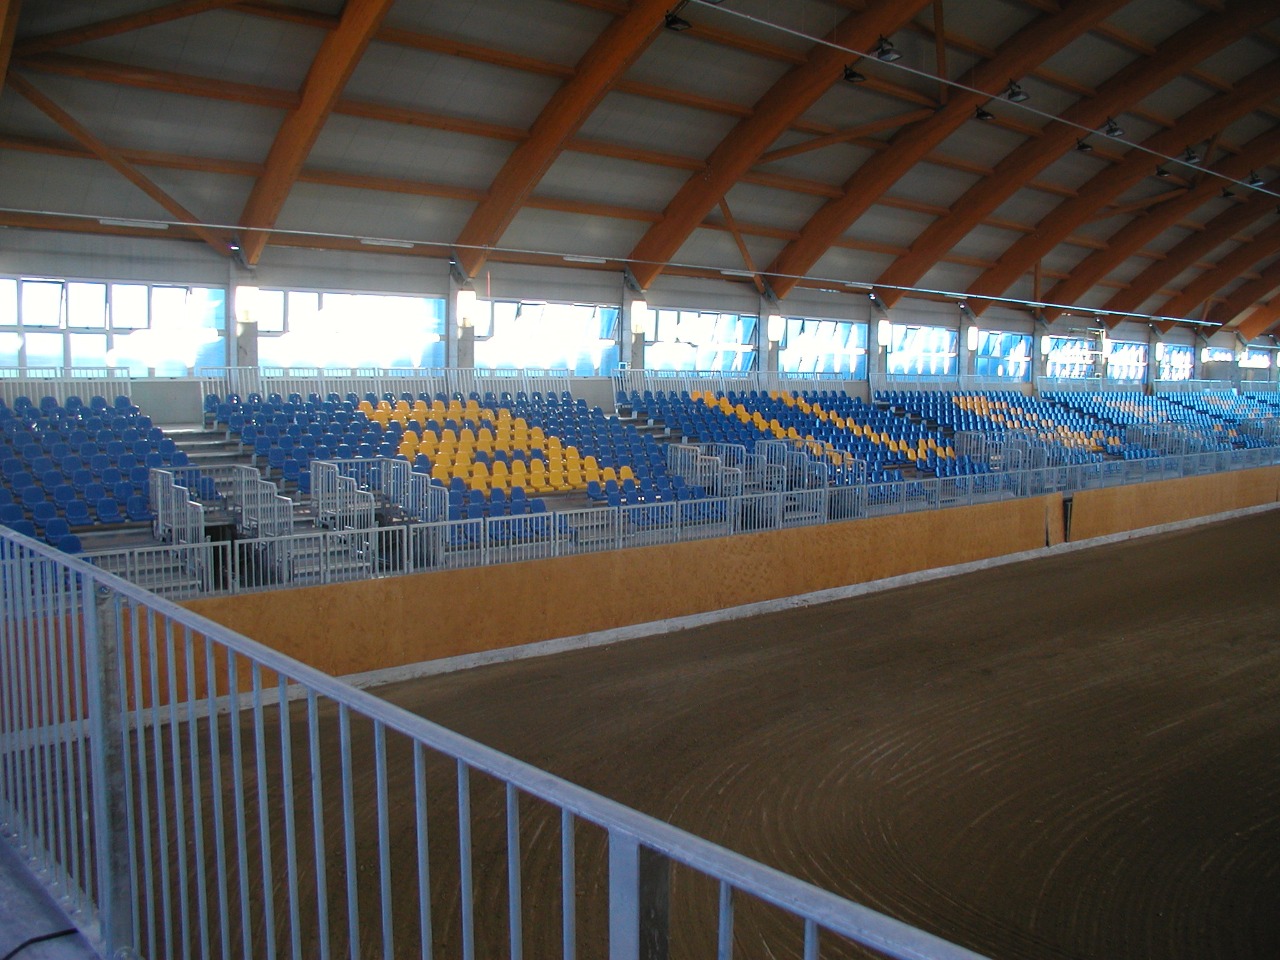 Gallery foto n.1 Prefabricated stands M12/1 - Horse Riding Center 